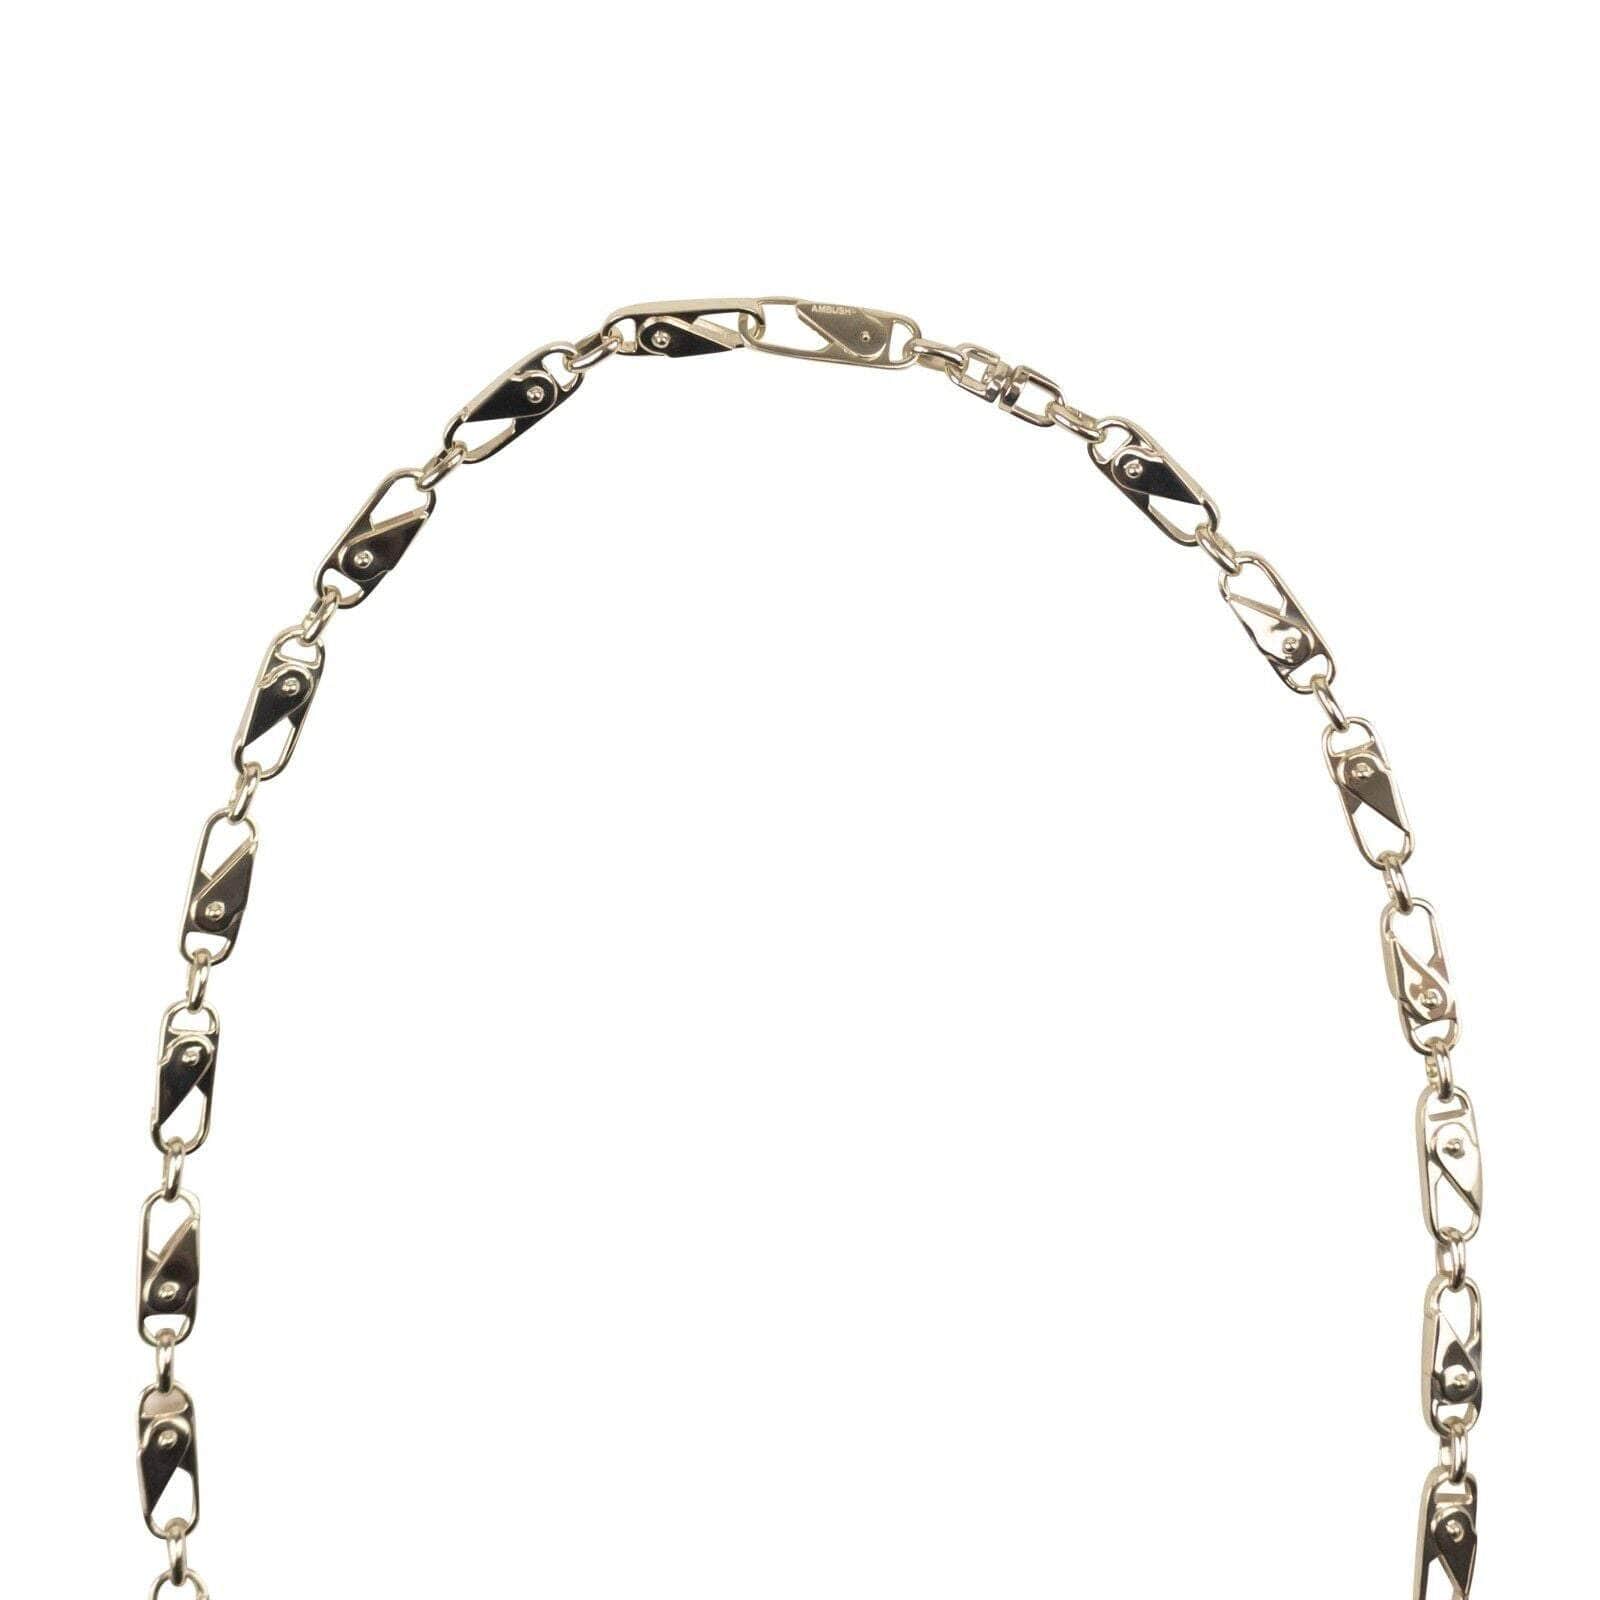 Ambush 1000-2000, ambush, channelenable-all, chicmi, couponcollection, gender-mens, main-accessories, mens-necklaces, mens-shoes, size-os OS Silver Metal Sling Snap Necklace 95-AMB-3012/OS 95-AMB-3012/OS